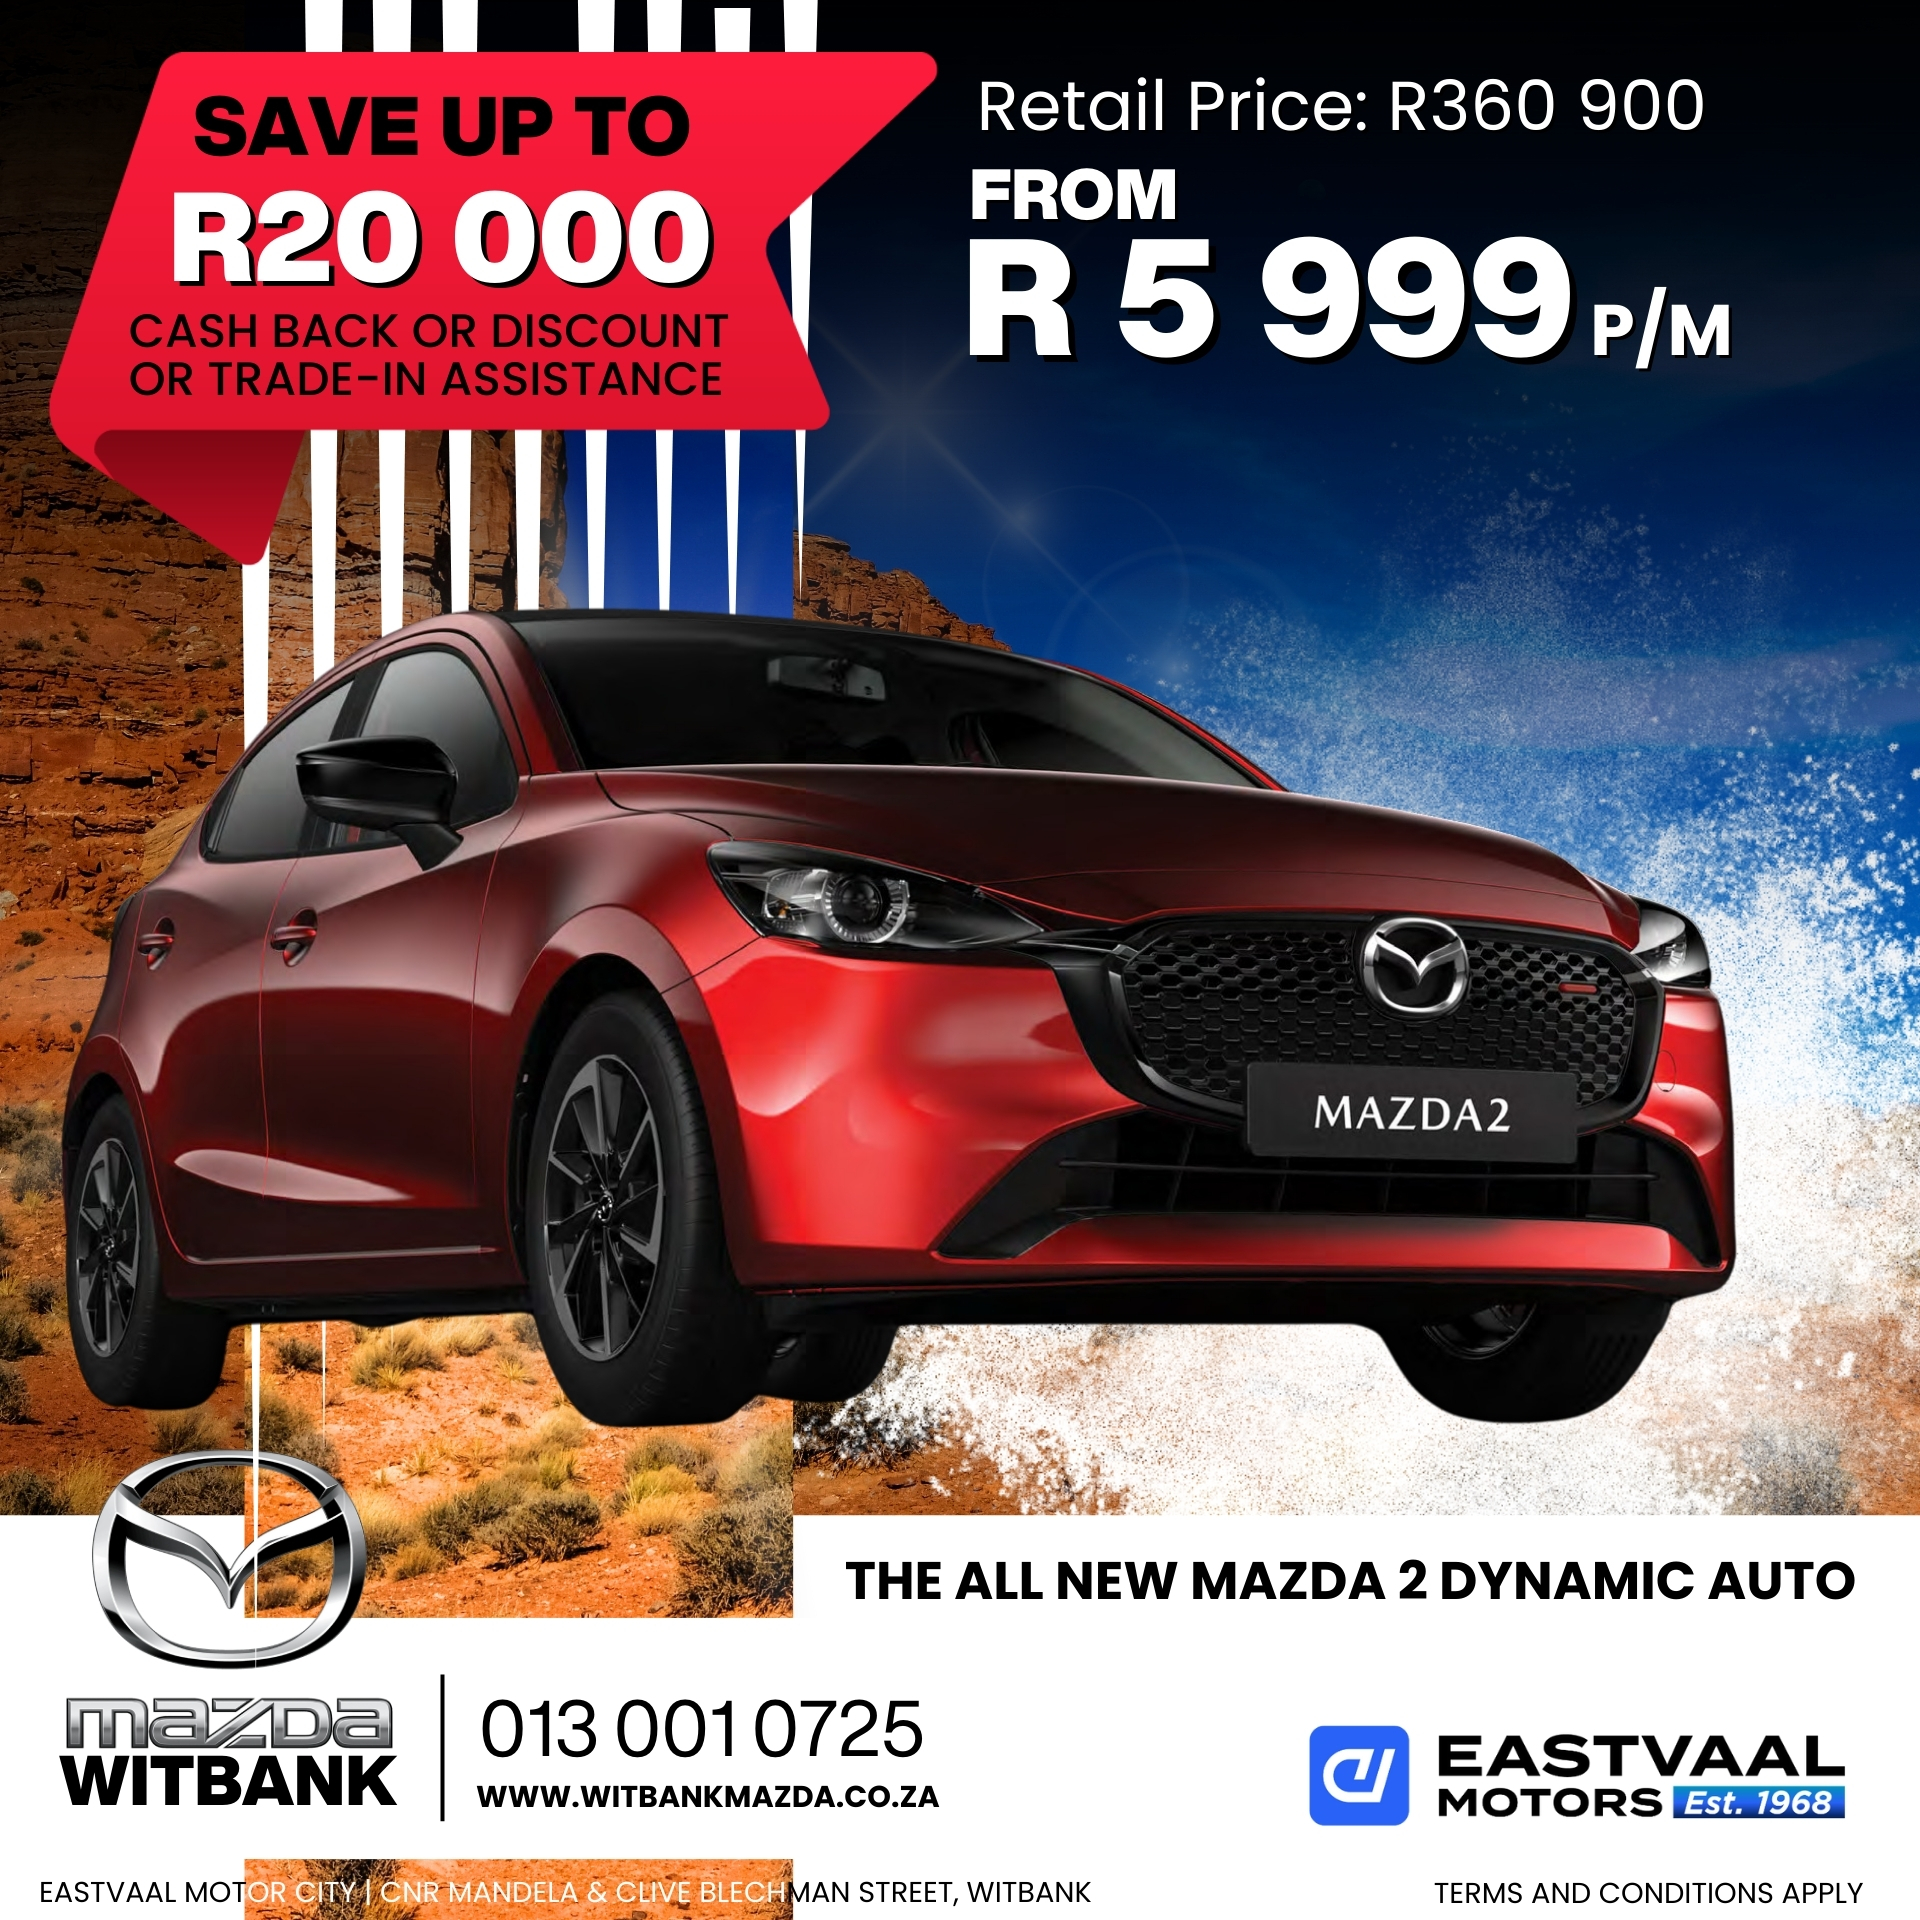 Drive into the future with a brand new Mazda this July! Visit Eastvaal Motor City and discover unbeatable deals. image from Eastvaal Motors